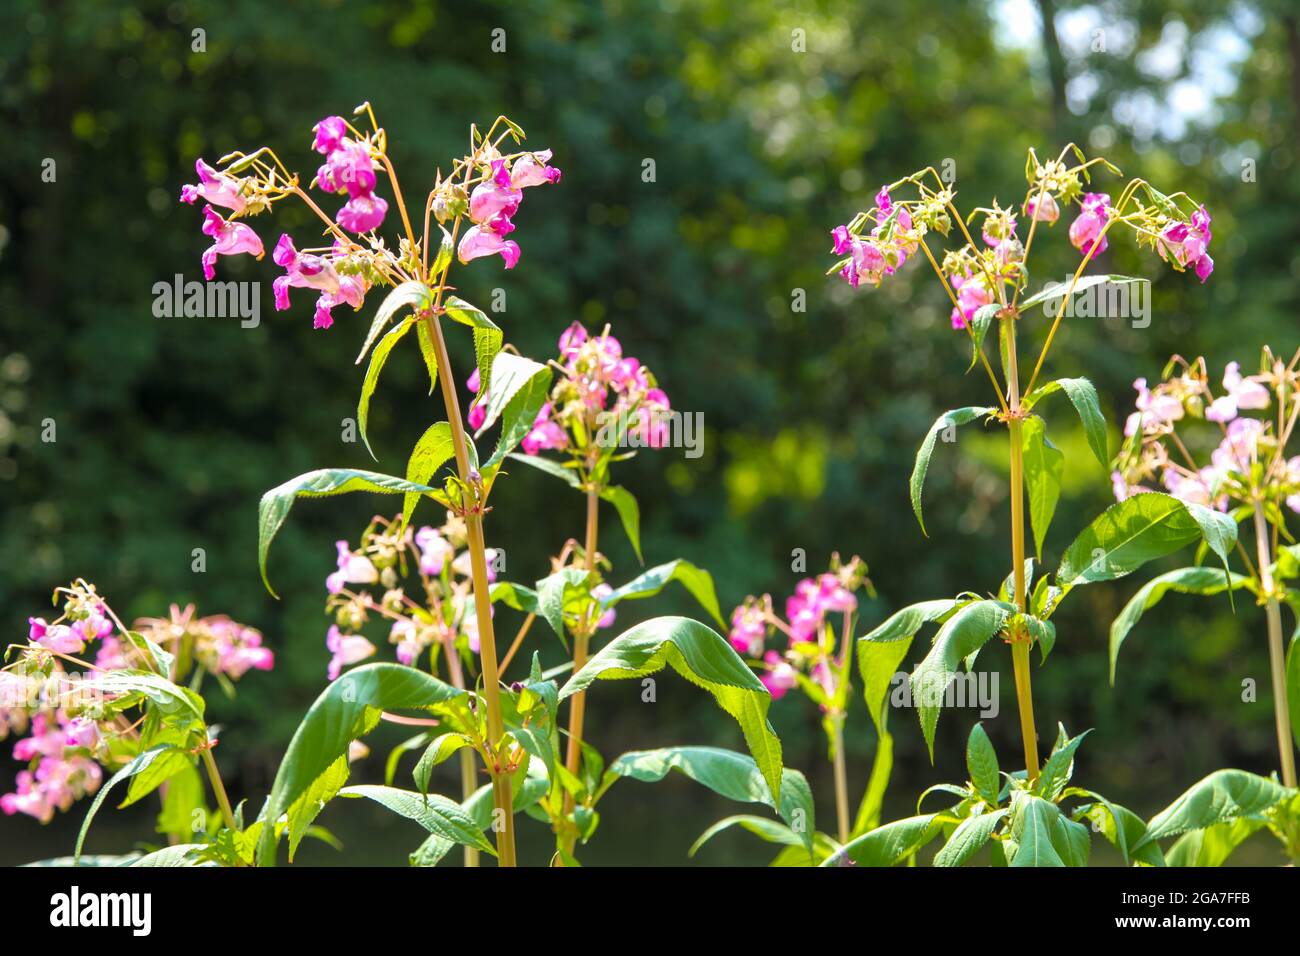 Himalayan Balsam (Impatiens glandulifera), A non-native invasive plant. The largest annual plant in Britain, growing at River Mole, Leatherhead, Surre Stock Photo